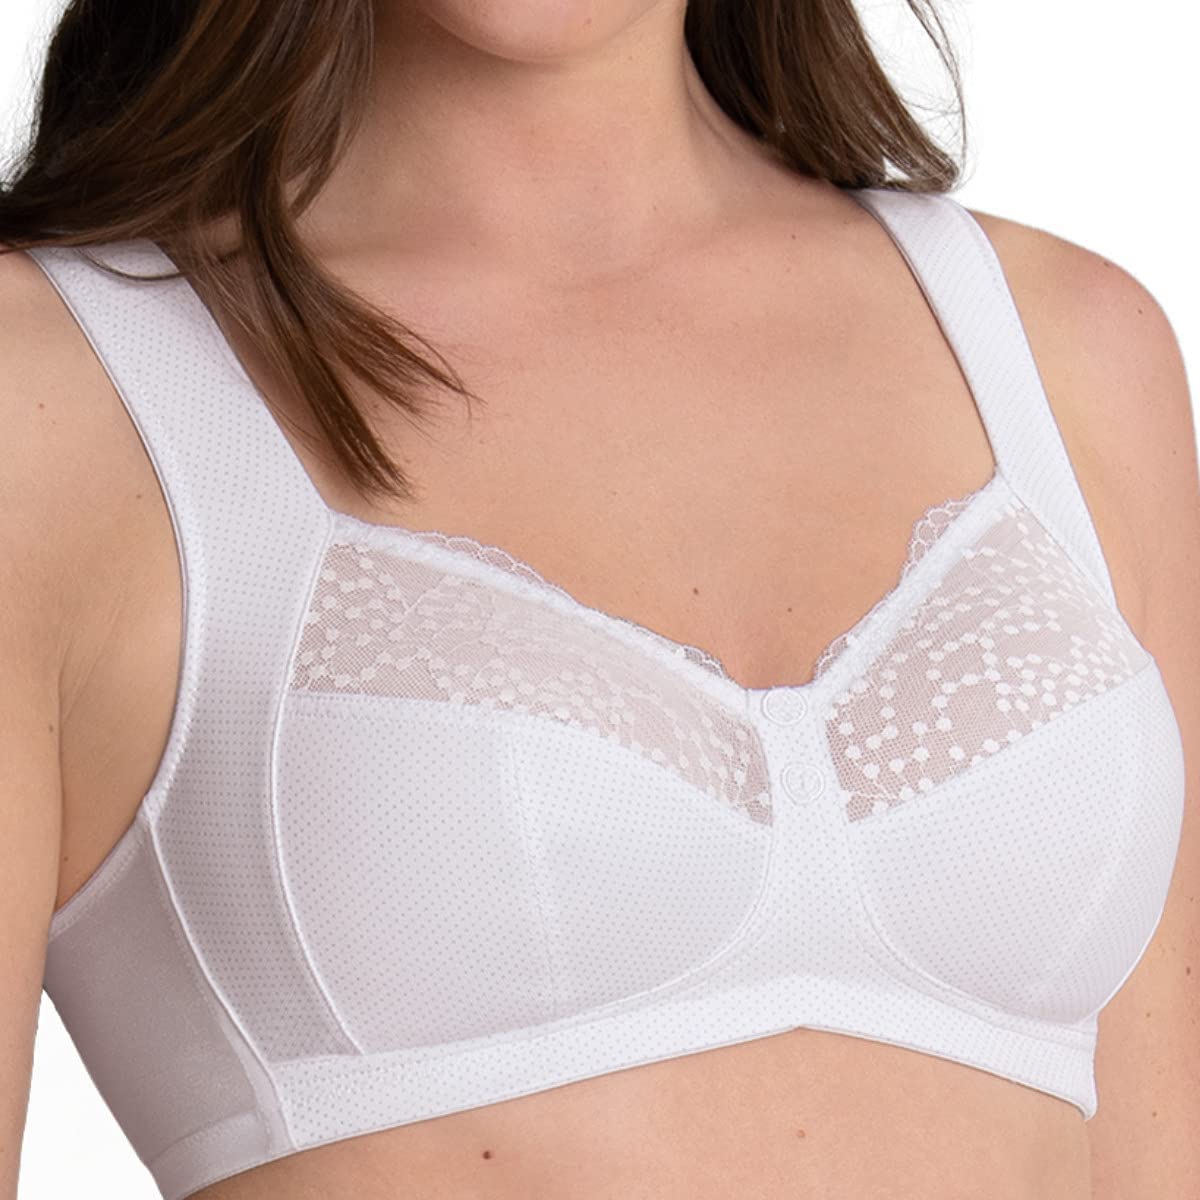 ANITA MATERNITY 5022, POST-NATAL, NON-WIRED, LACE, FULL CUP, FIRM SUPPORT  BRA